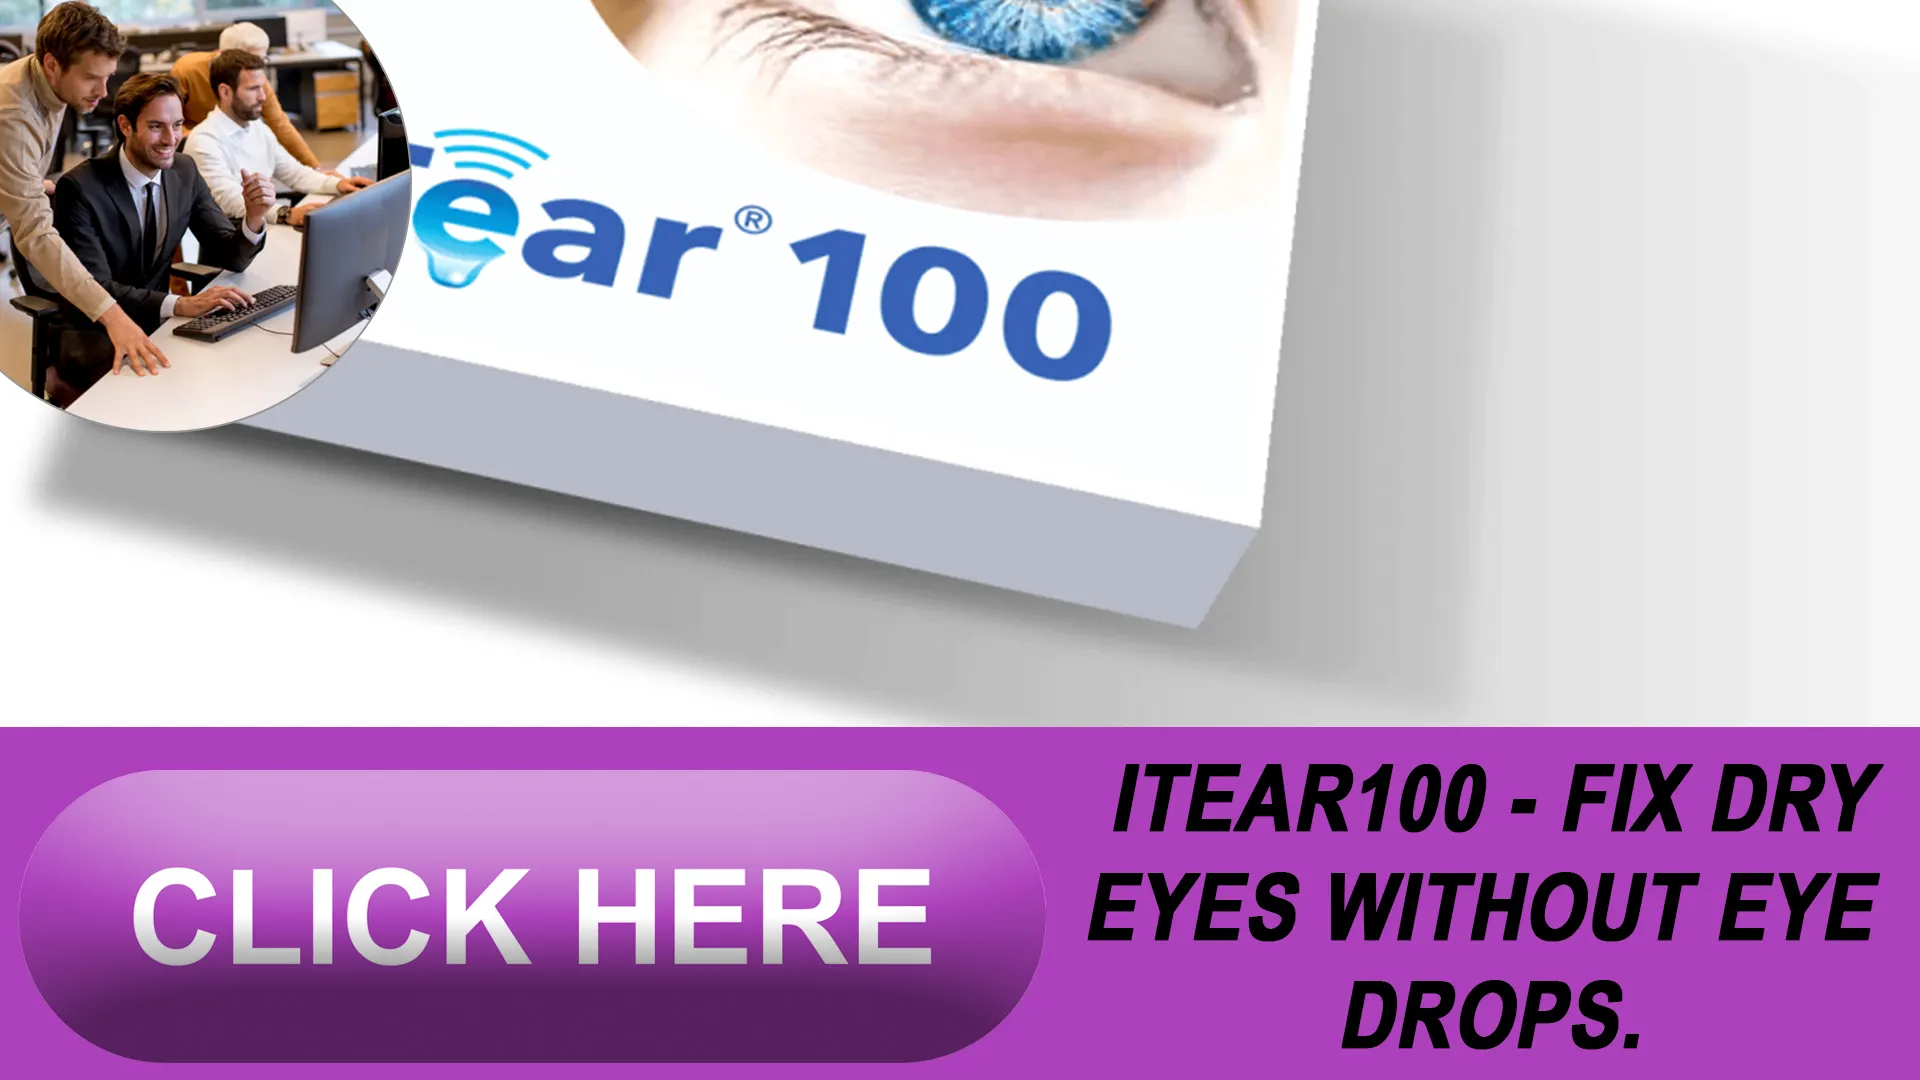  Taking the First Step: How to Get Your iTEAR100 